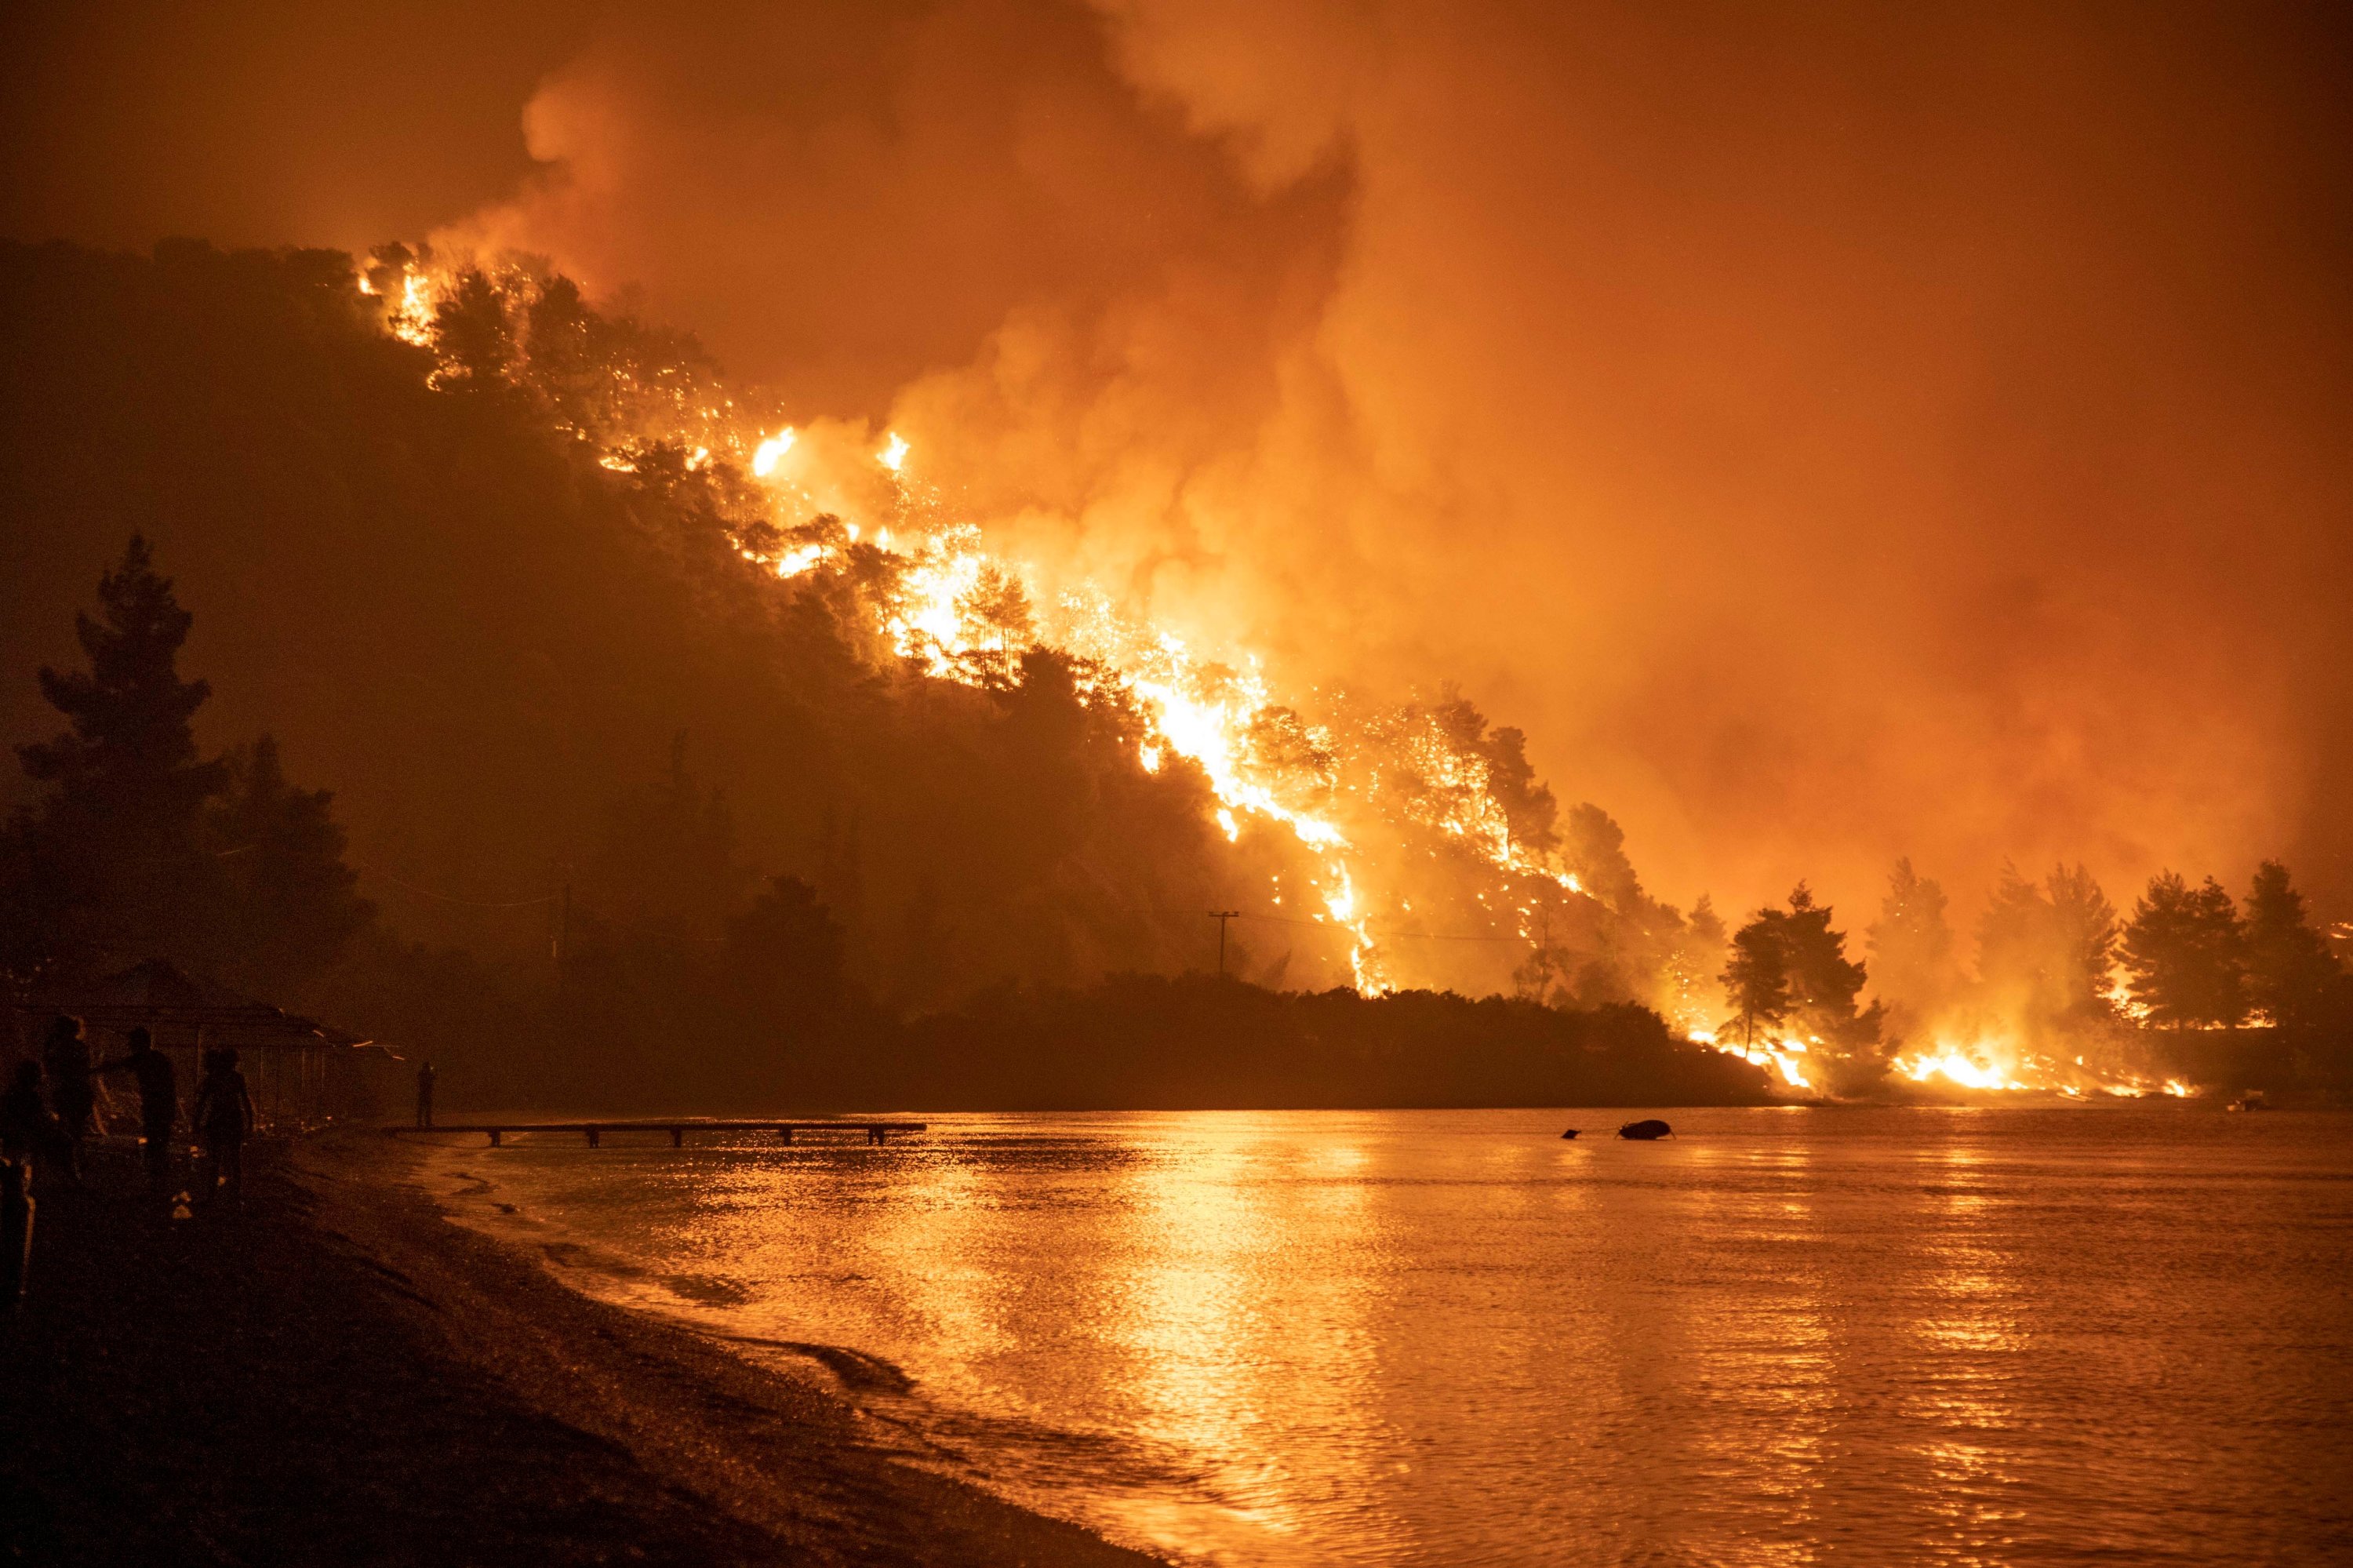 Flames rise as a wildfire burns in the village of Limni, on the island of Evia, Greece, Aug. 6, 2021. (Reuters Photo)